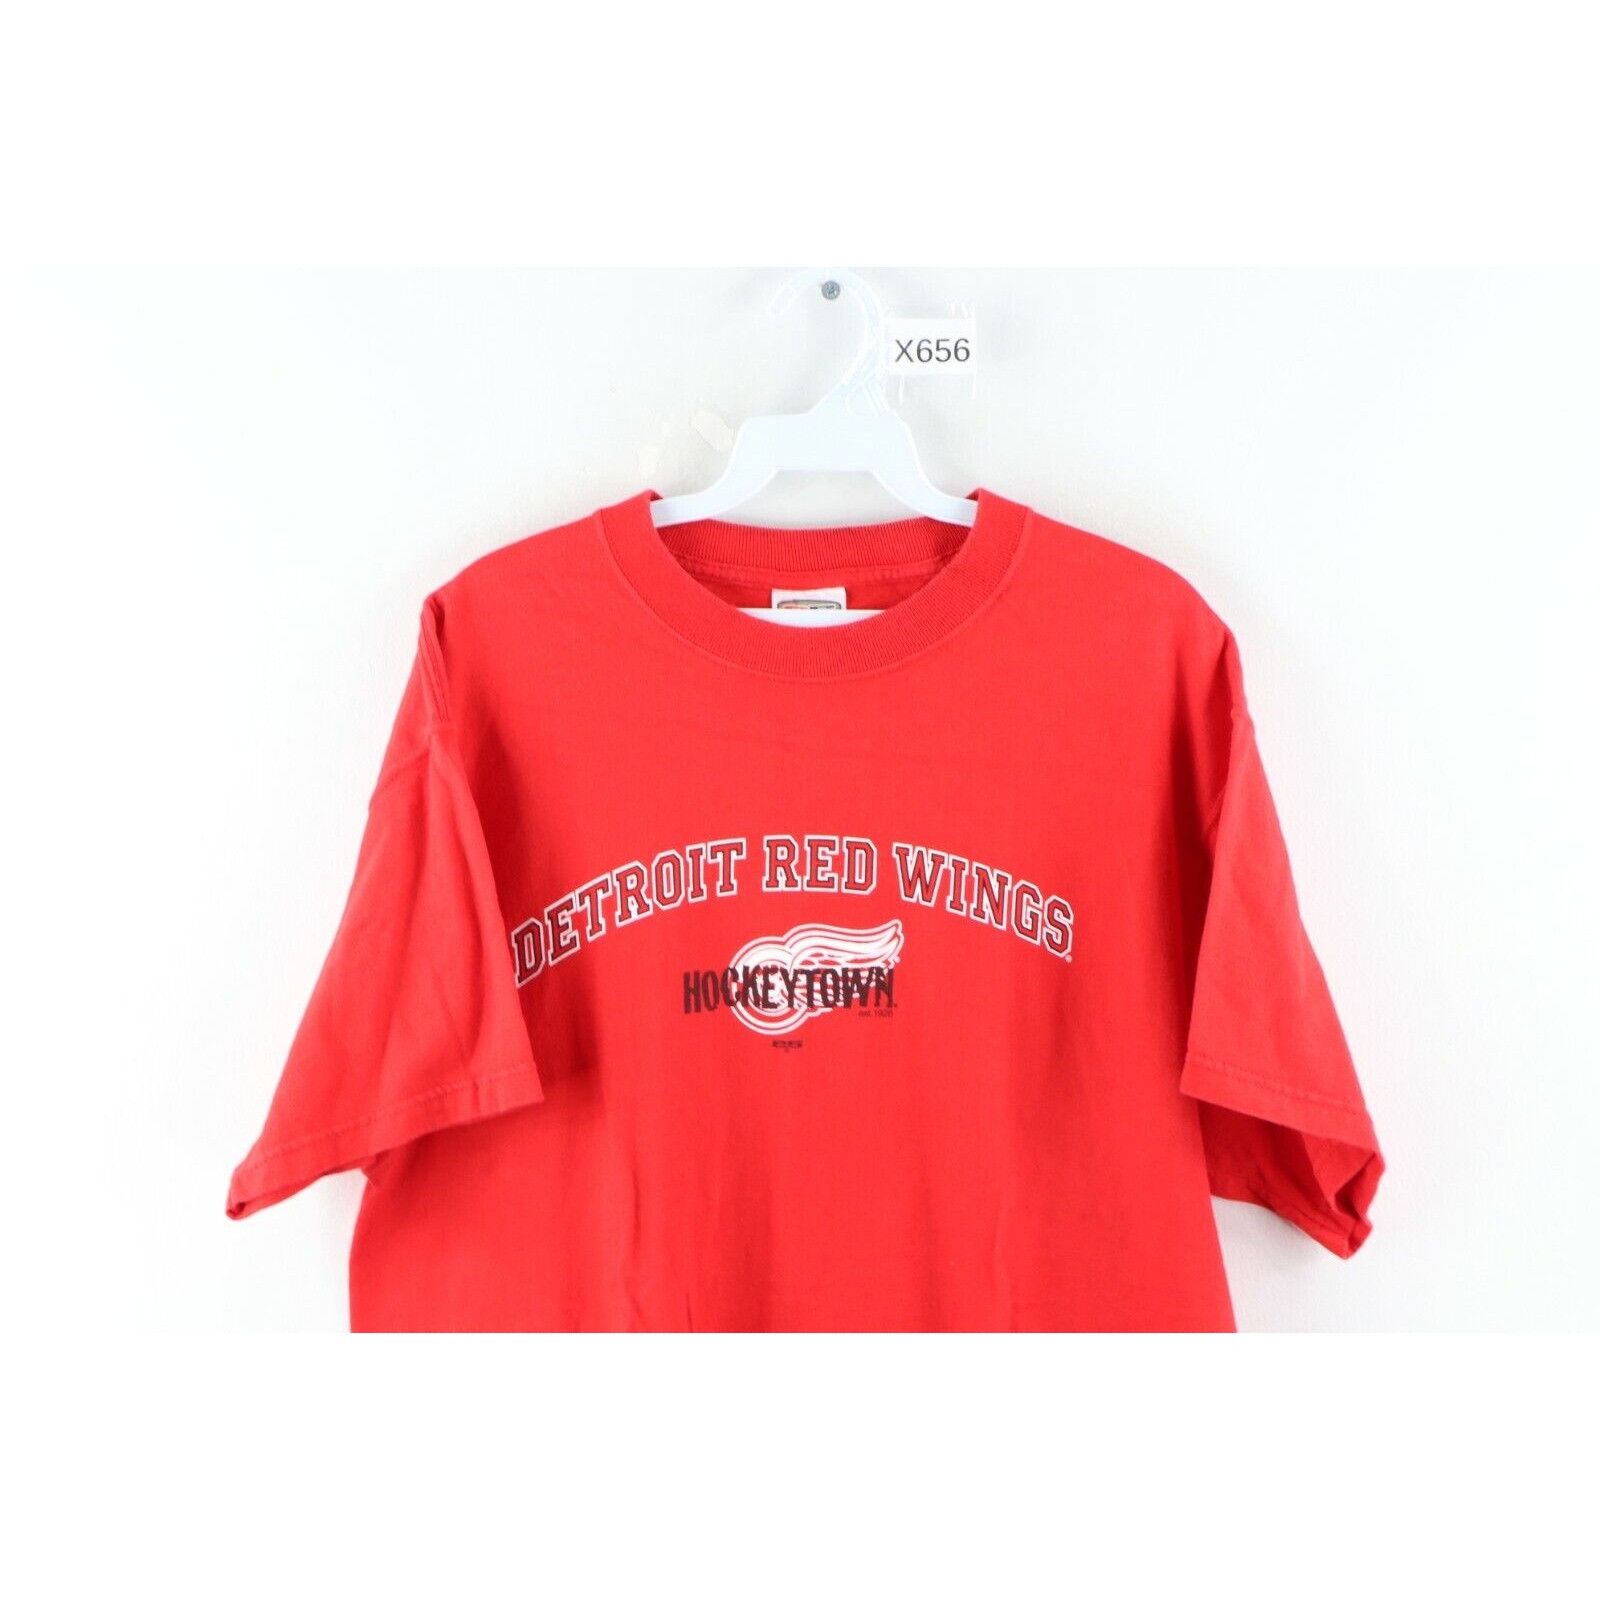 Vintage Vintage 90s Detroit Red Wings Hockey Spell Out T-Shirt Size US L / EU 52-54 / 3 - 2 Preview